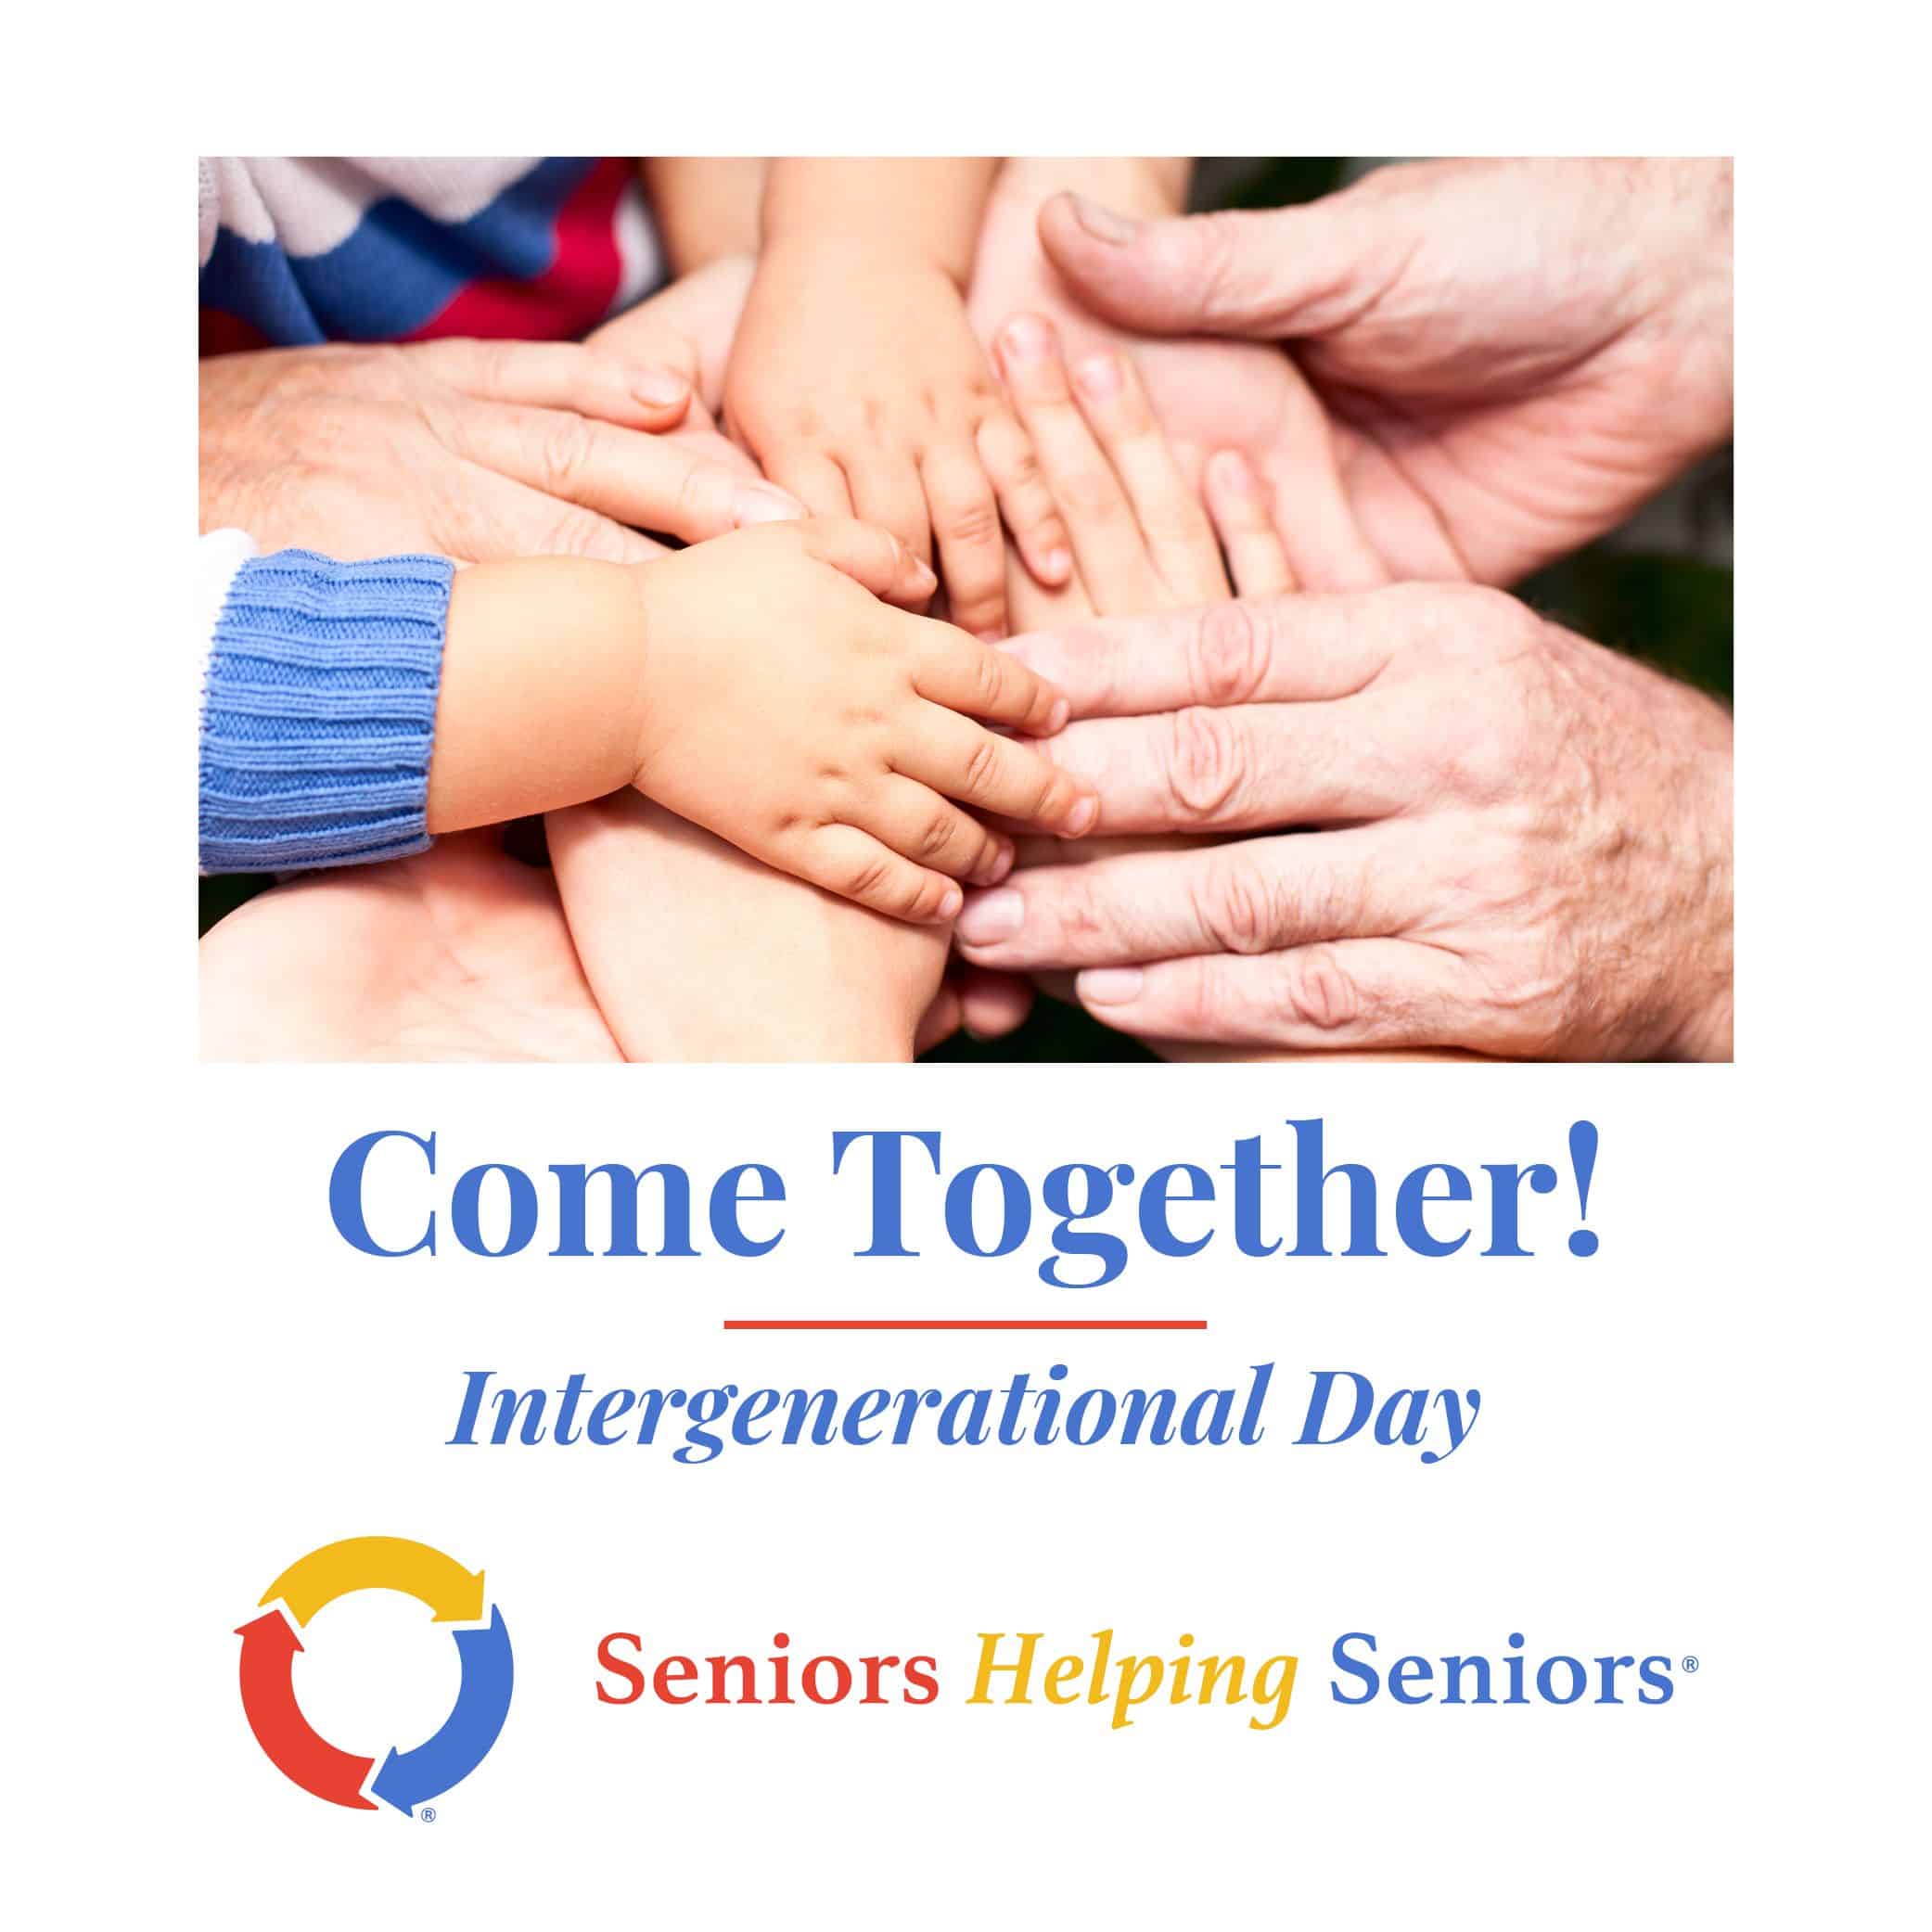 Come Together – Intergenerational Day